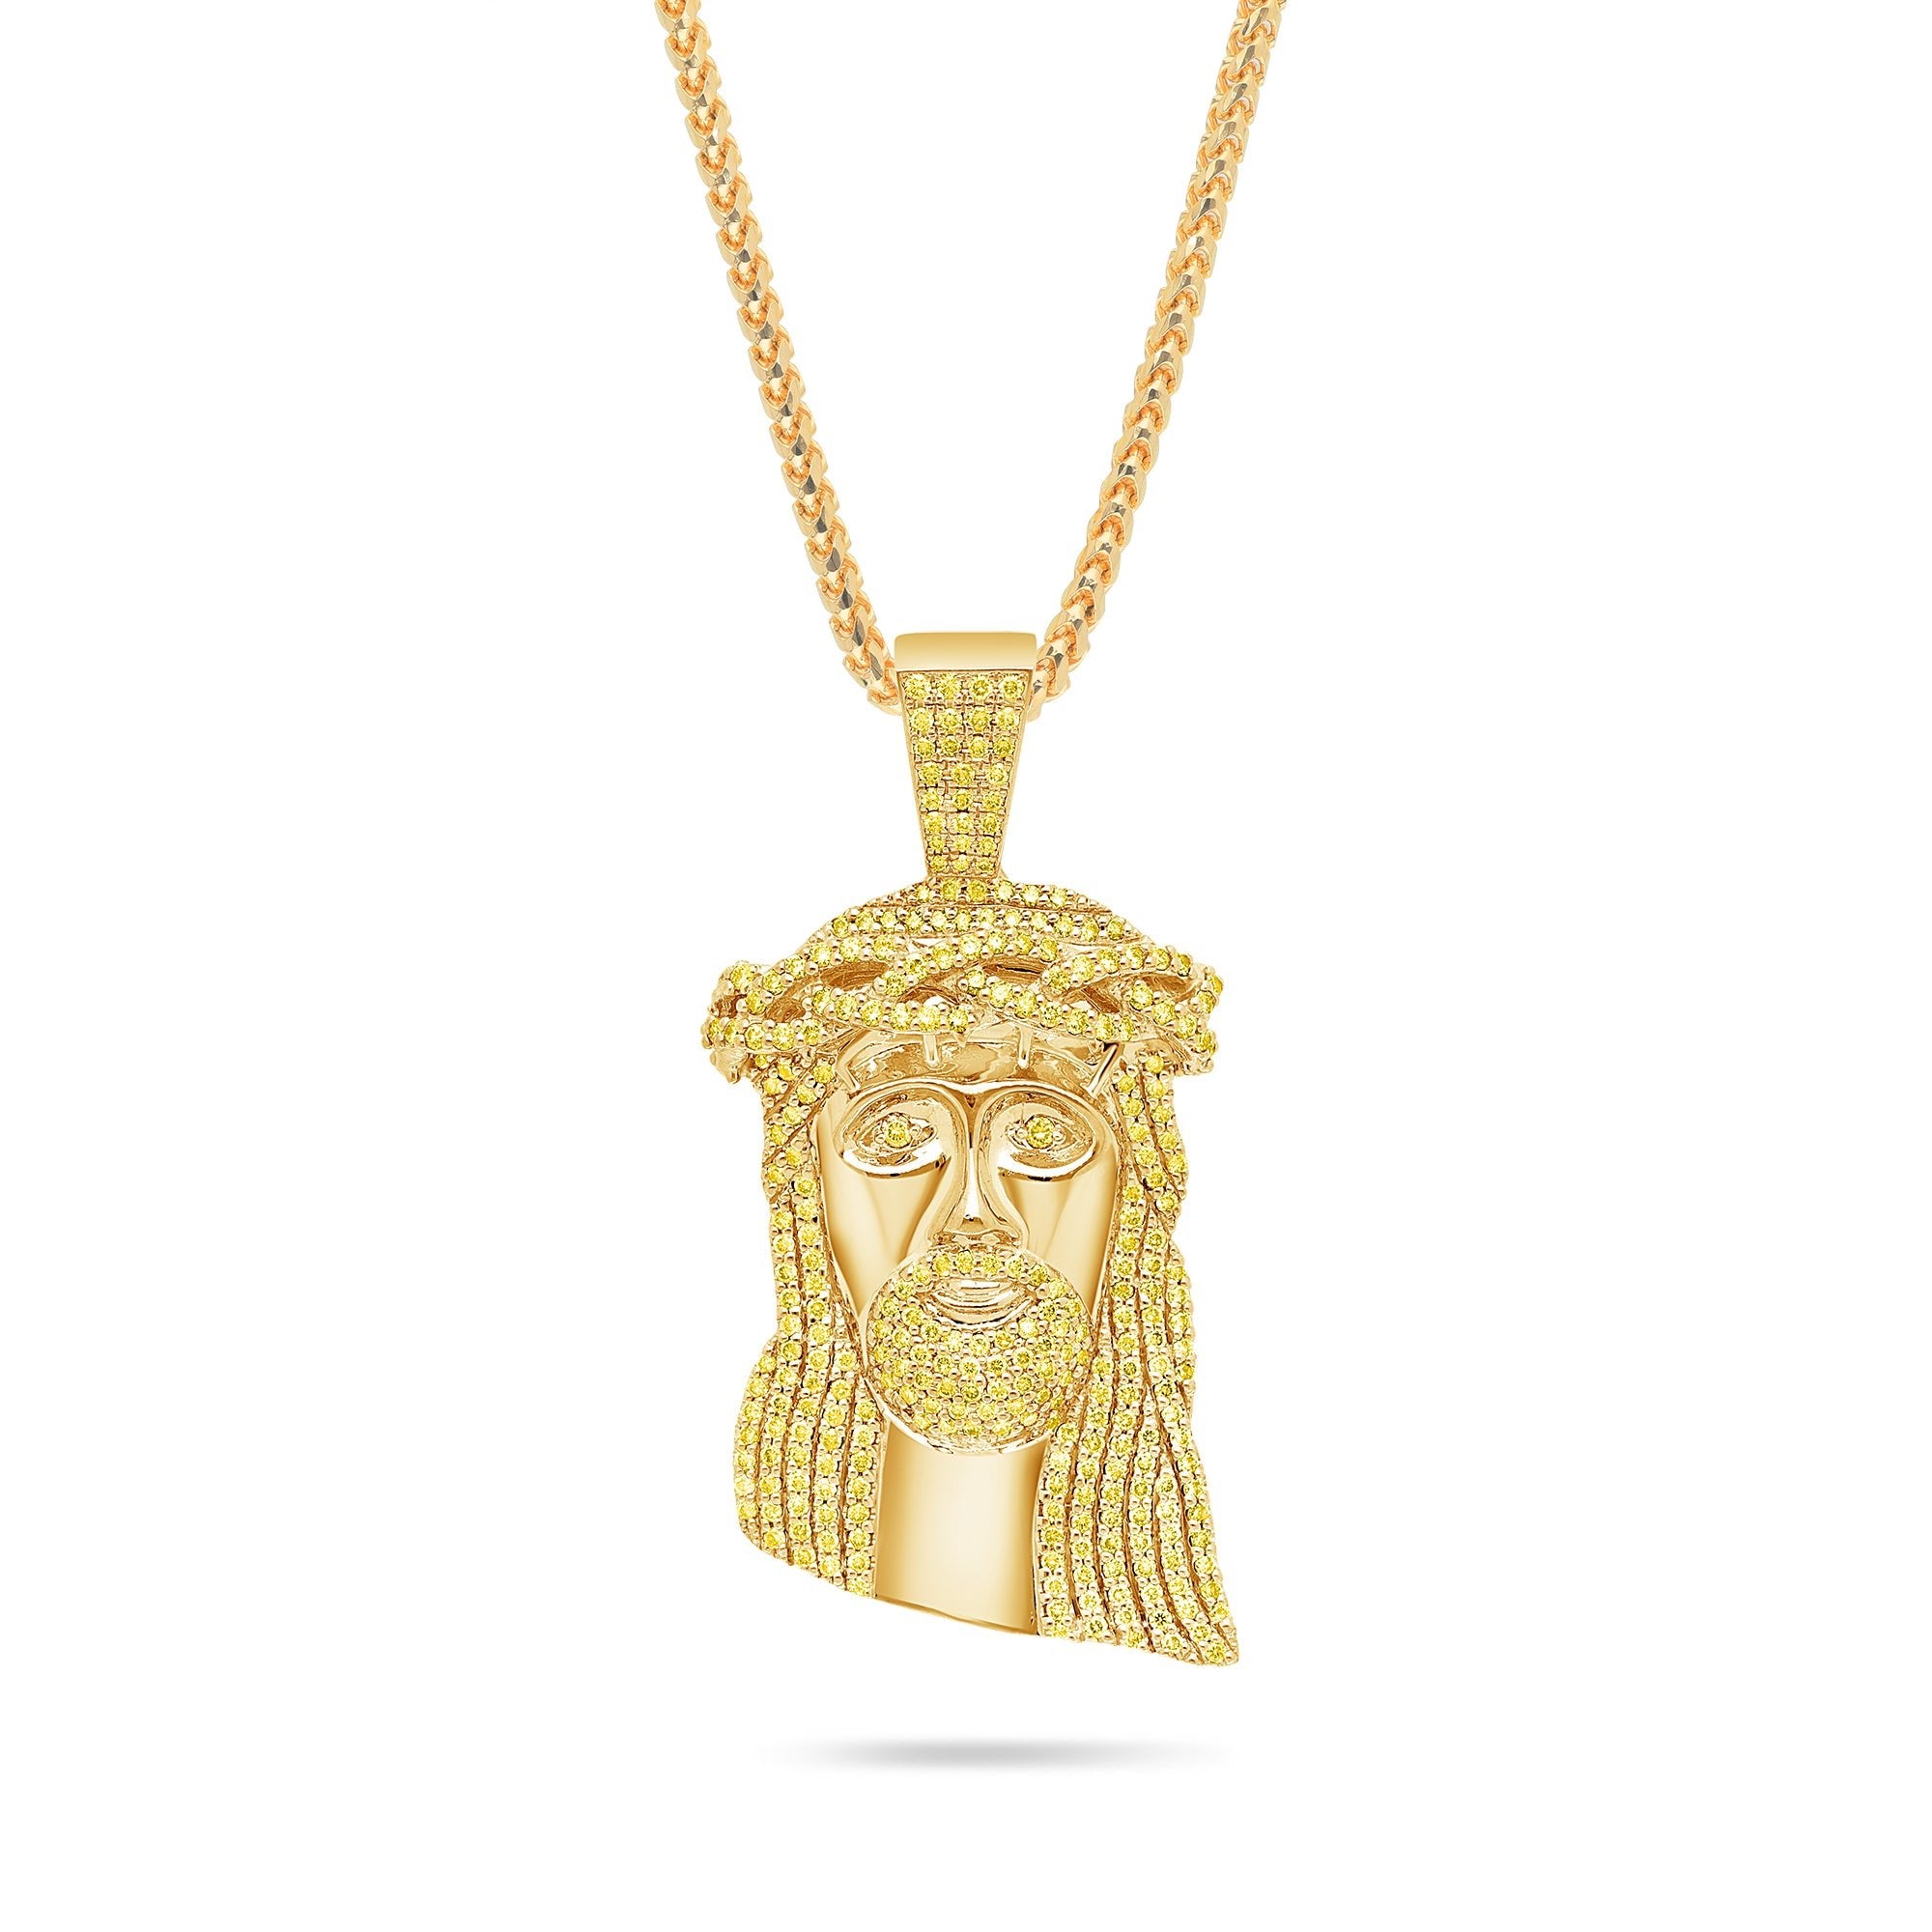 Pendants - Baby Jesus Piece (Special Yellow, Fully Iced) - ifandco.com